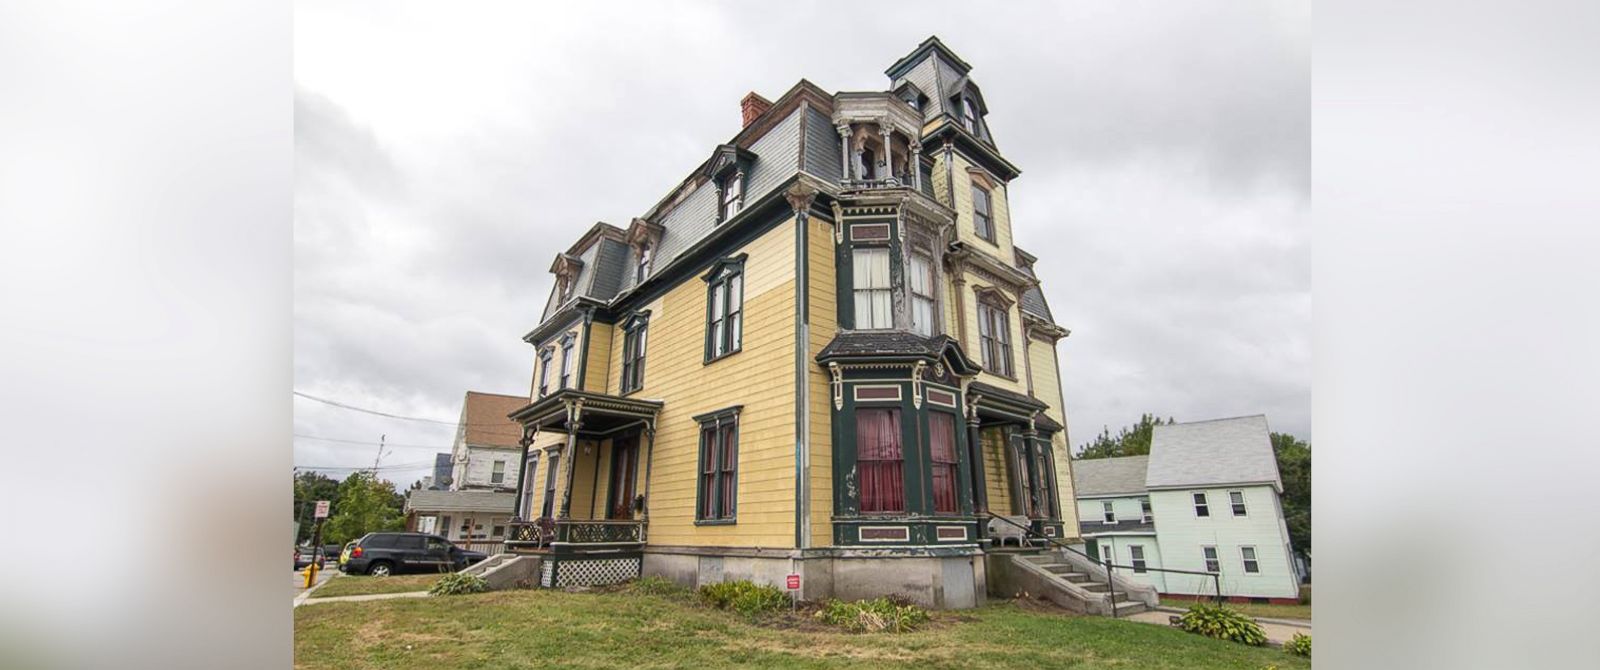 Homeowner to Turn 'Haunted' Mansion into Scary Attraction